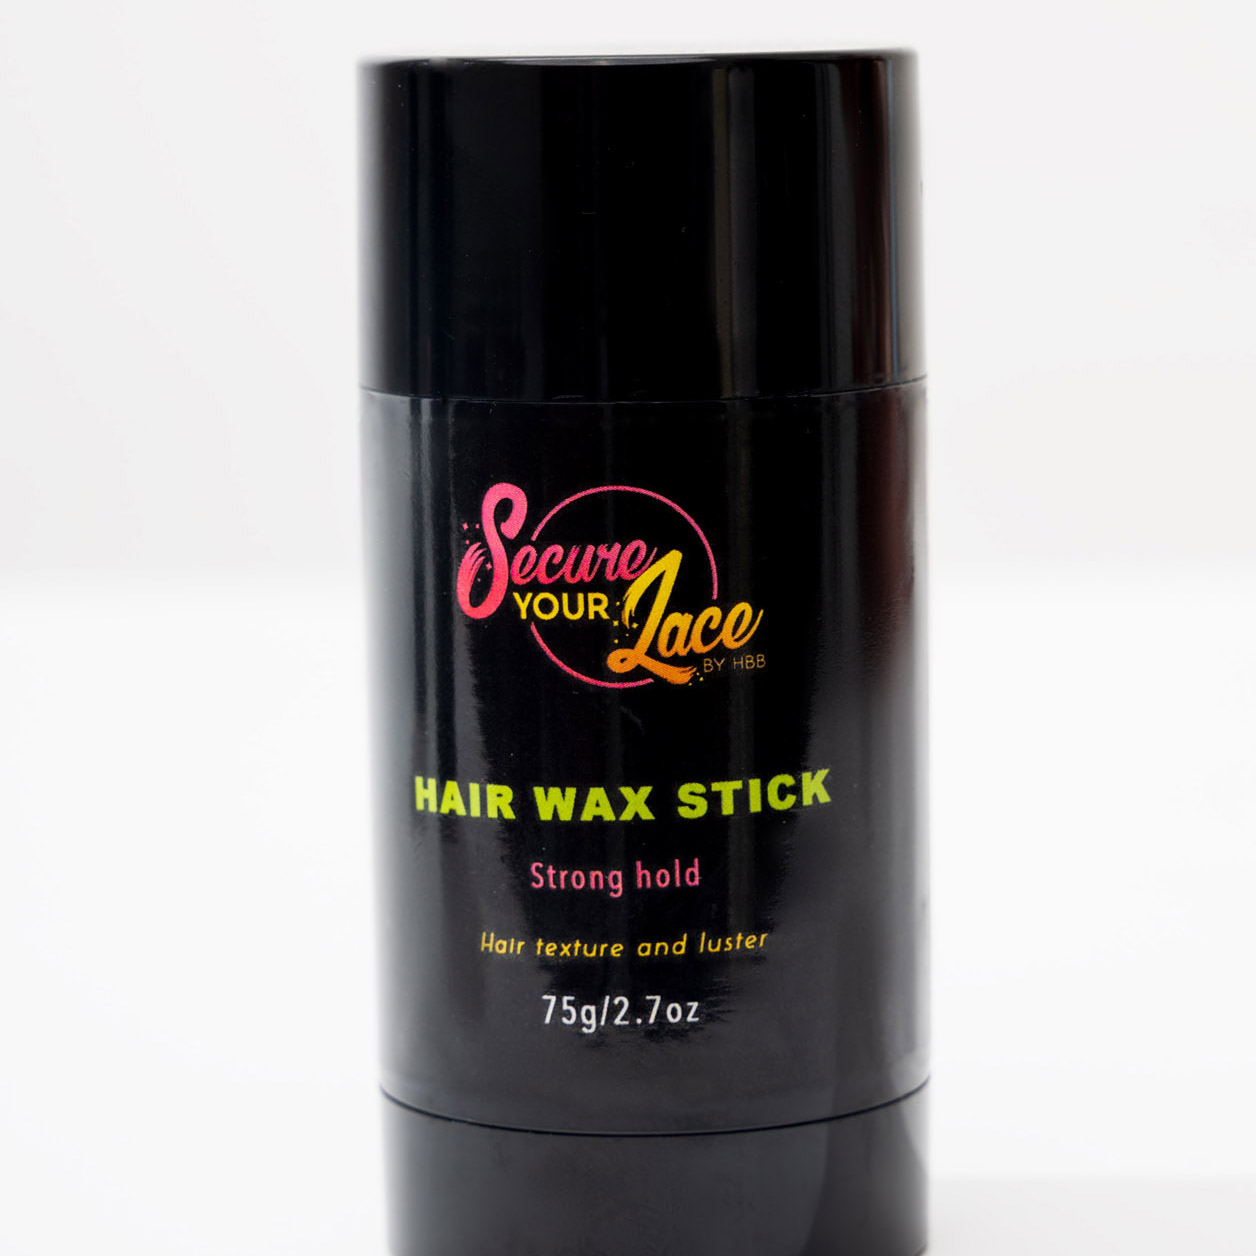 1Secure_your_lace_hair_wax_stick